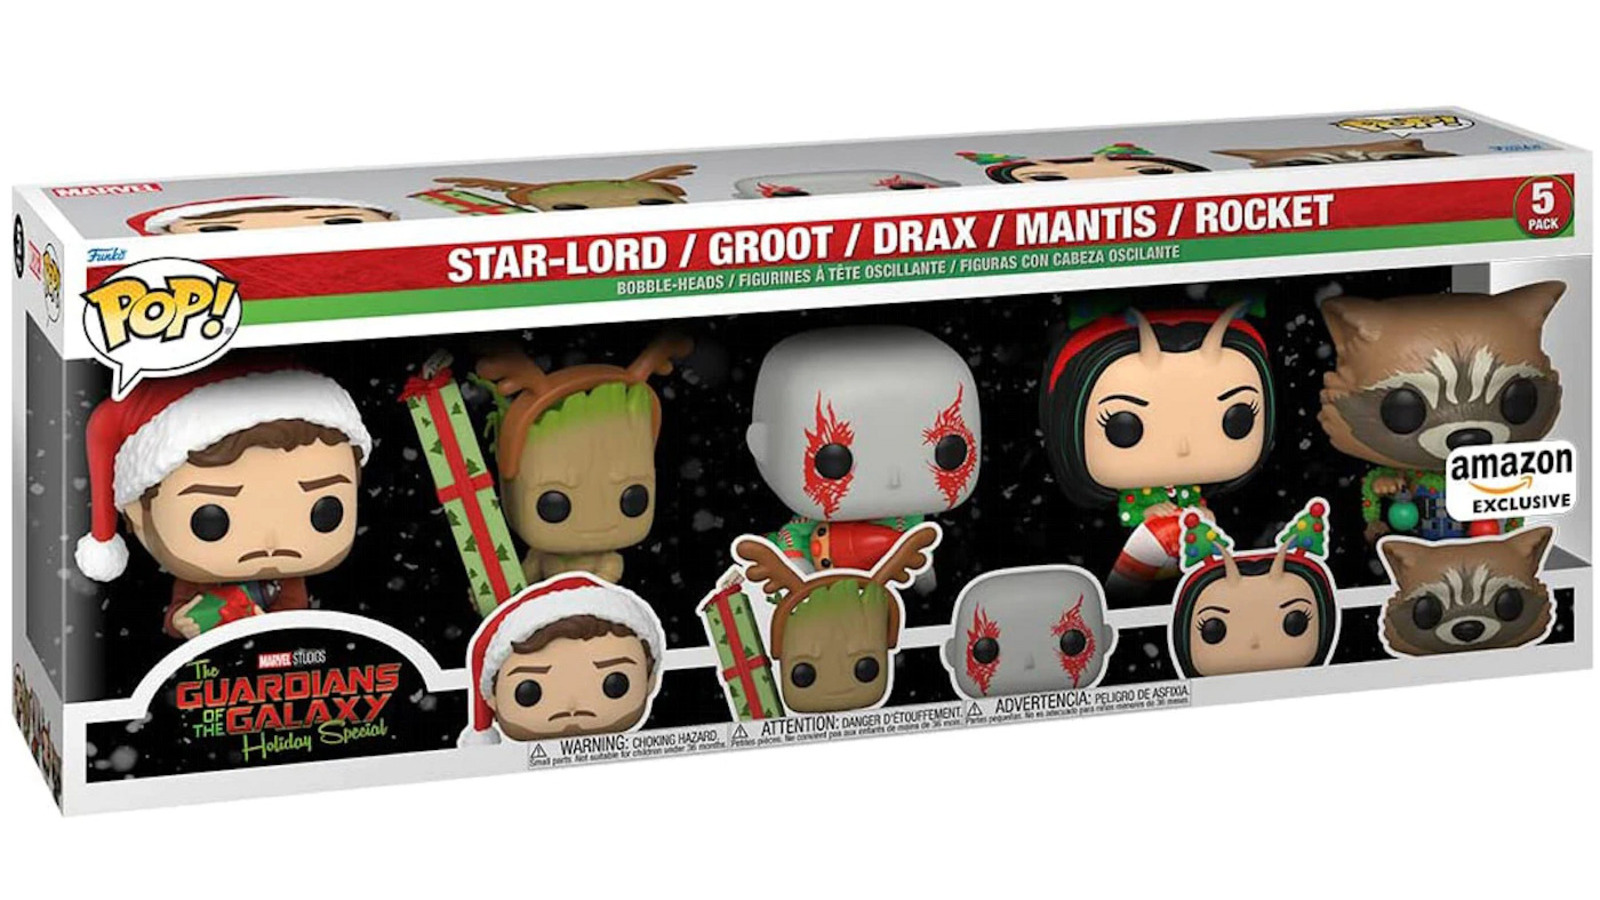 Marvel: Guardians of the Galaxy Funko POPs are in super offer on Amazon